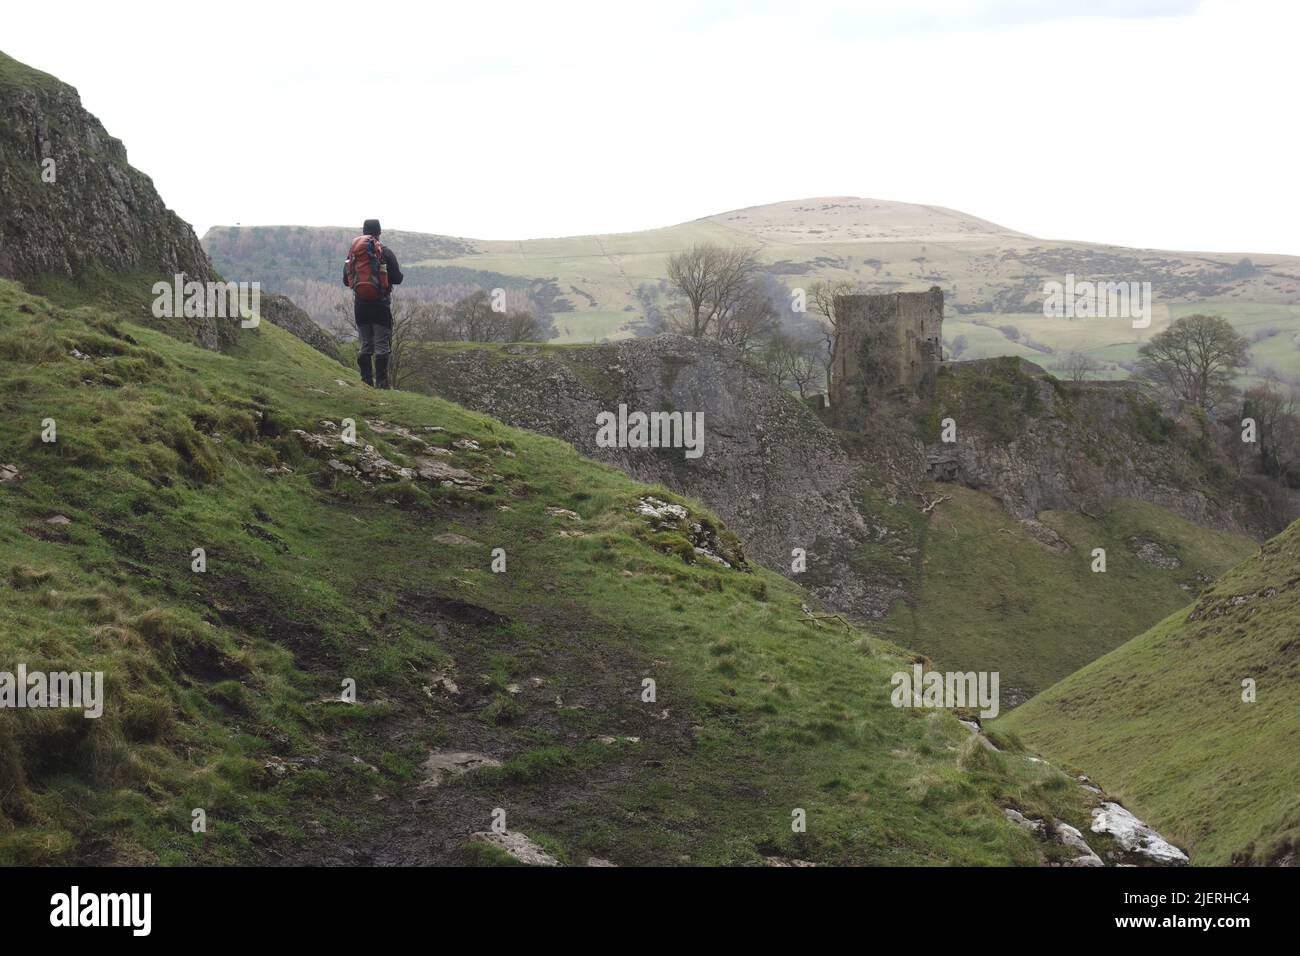 Man Looking at Peveril/Castleton Castle from the Peak Cavern Gorge on the Limestone Way in Castleton, Derbyshire, Peak District National Park. UK. Stock Photo